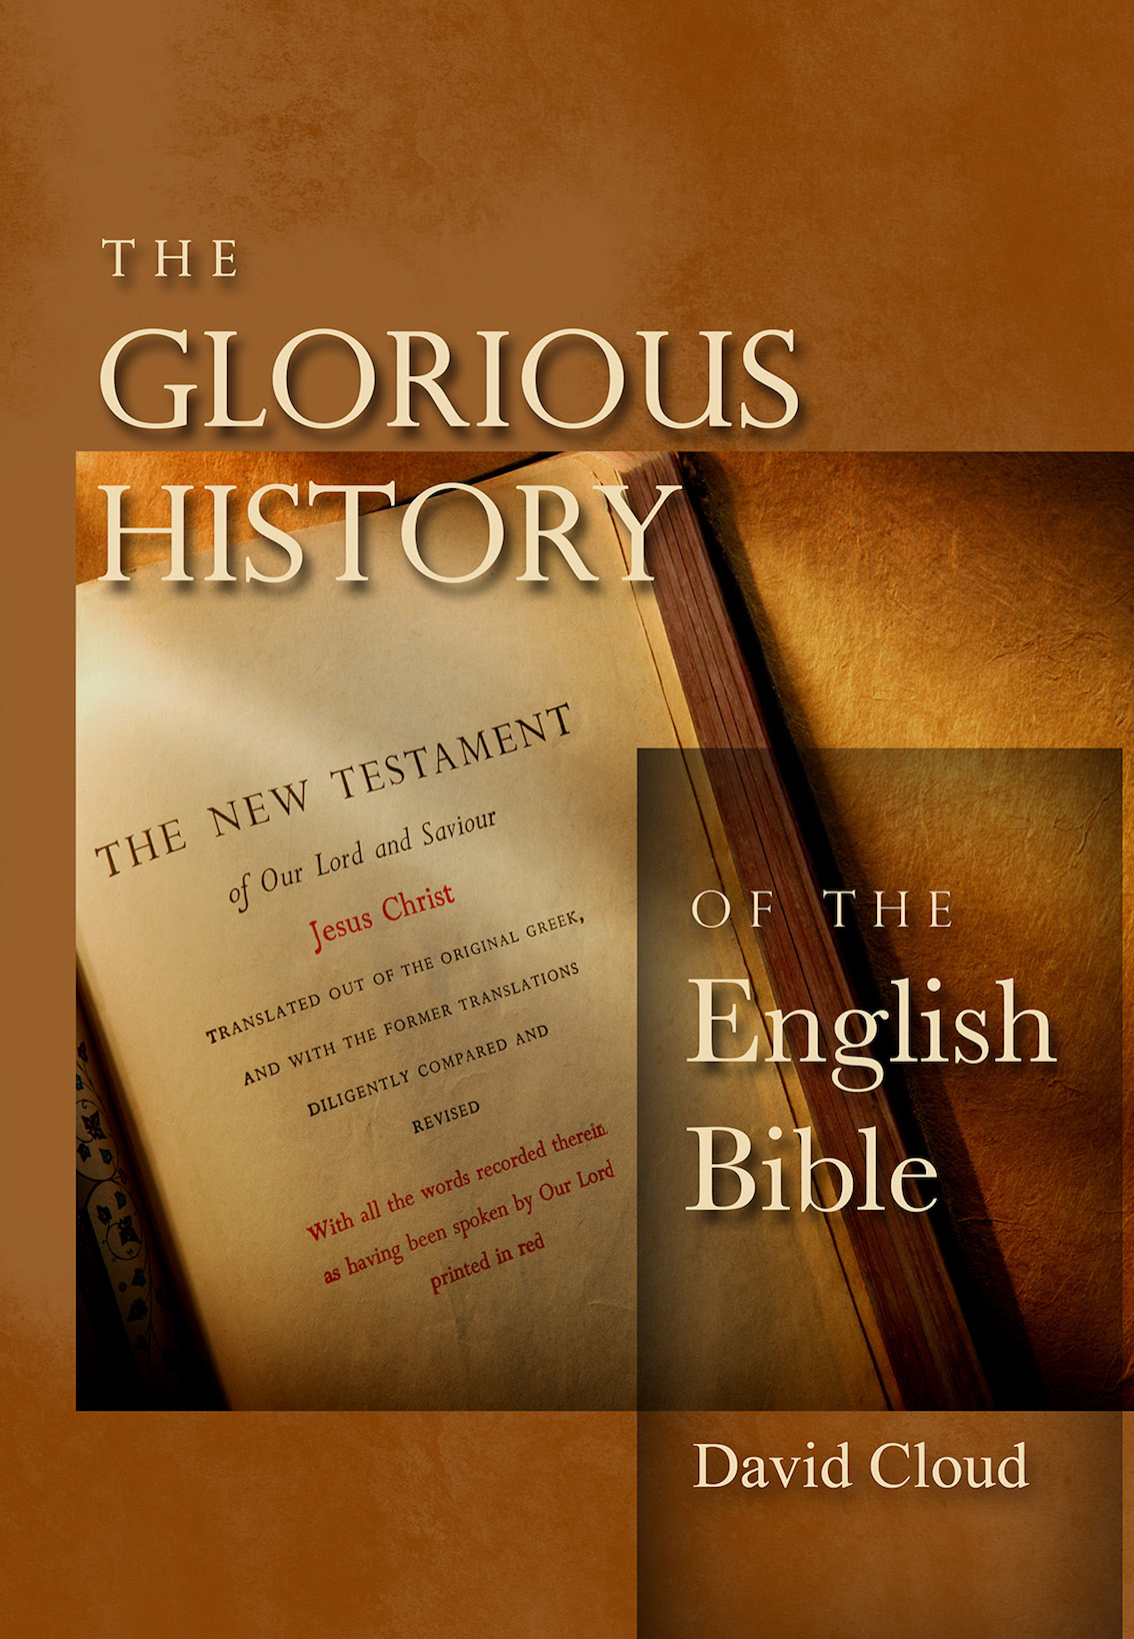 The Glorious History of the English Bible Copyright 2006 by David Cloud Updated - photo 1